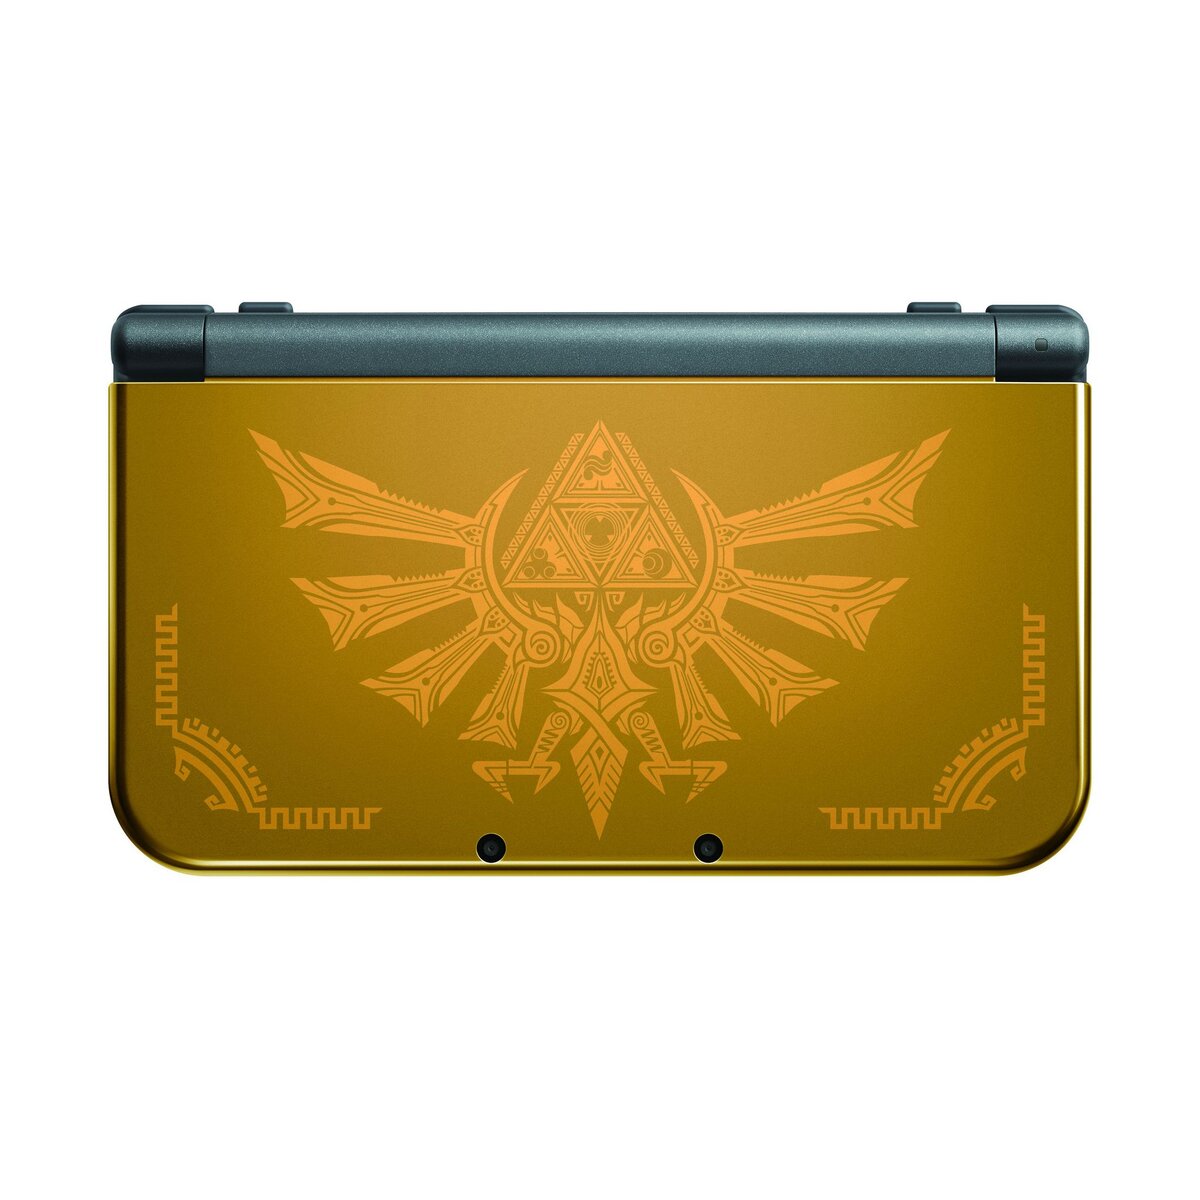 Console New 3DS XL Hyrule Edition